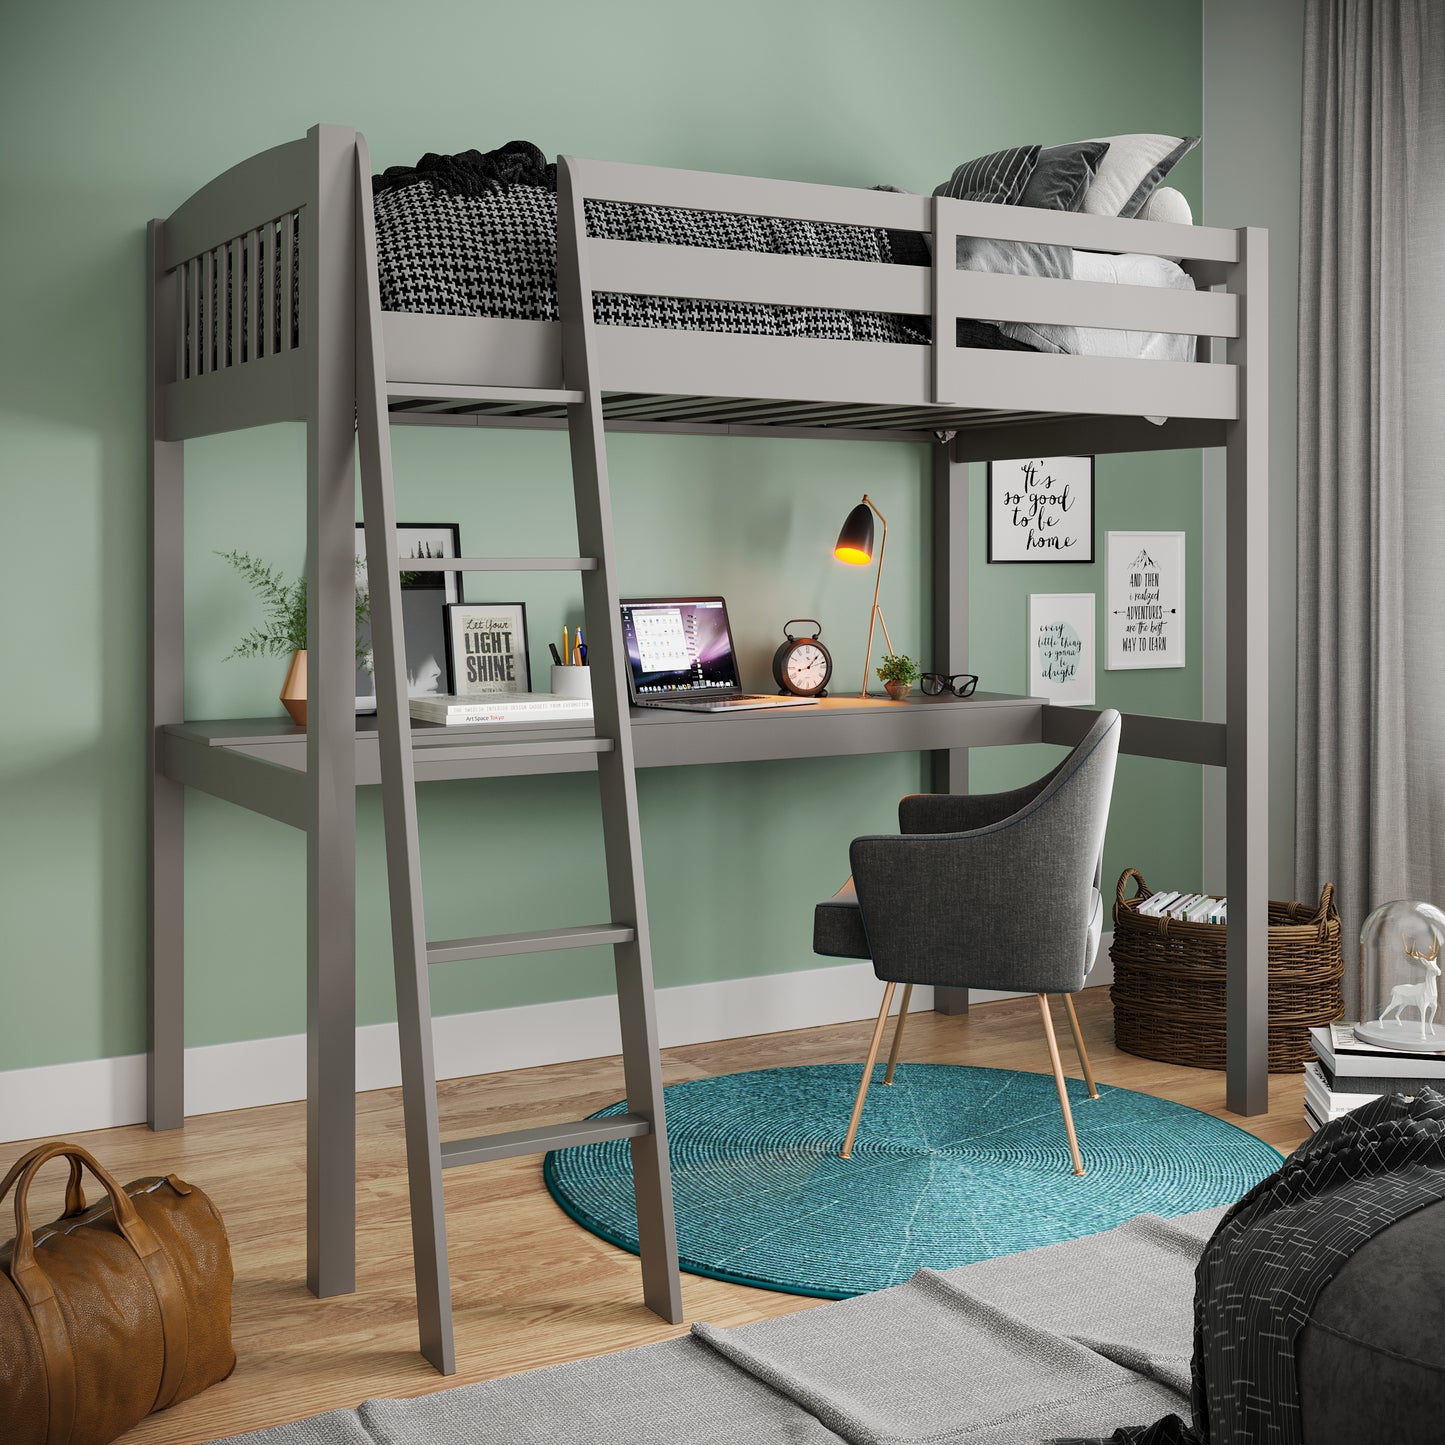 Yes4Wood Everest Grey High Loft Bed with Desk and Storage, Space Saver Full Size Kids Loft Bed with Stairs for Toddlers Assembled in Sturdy Solid Wood, No Box Spring Needed